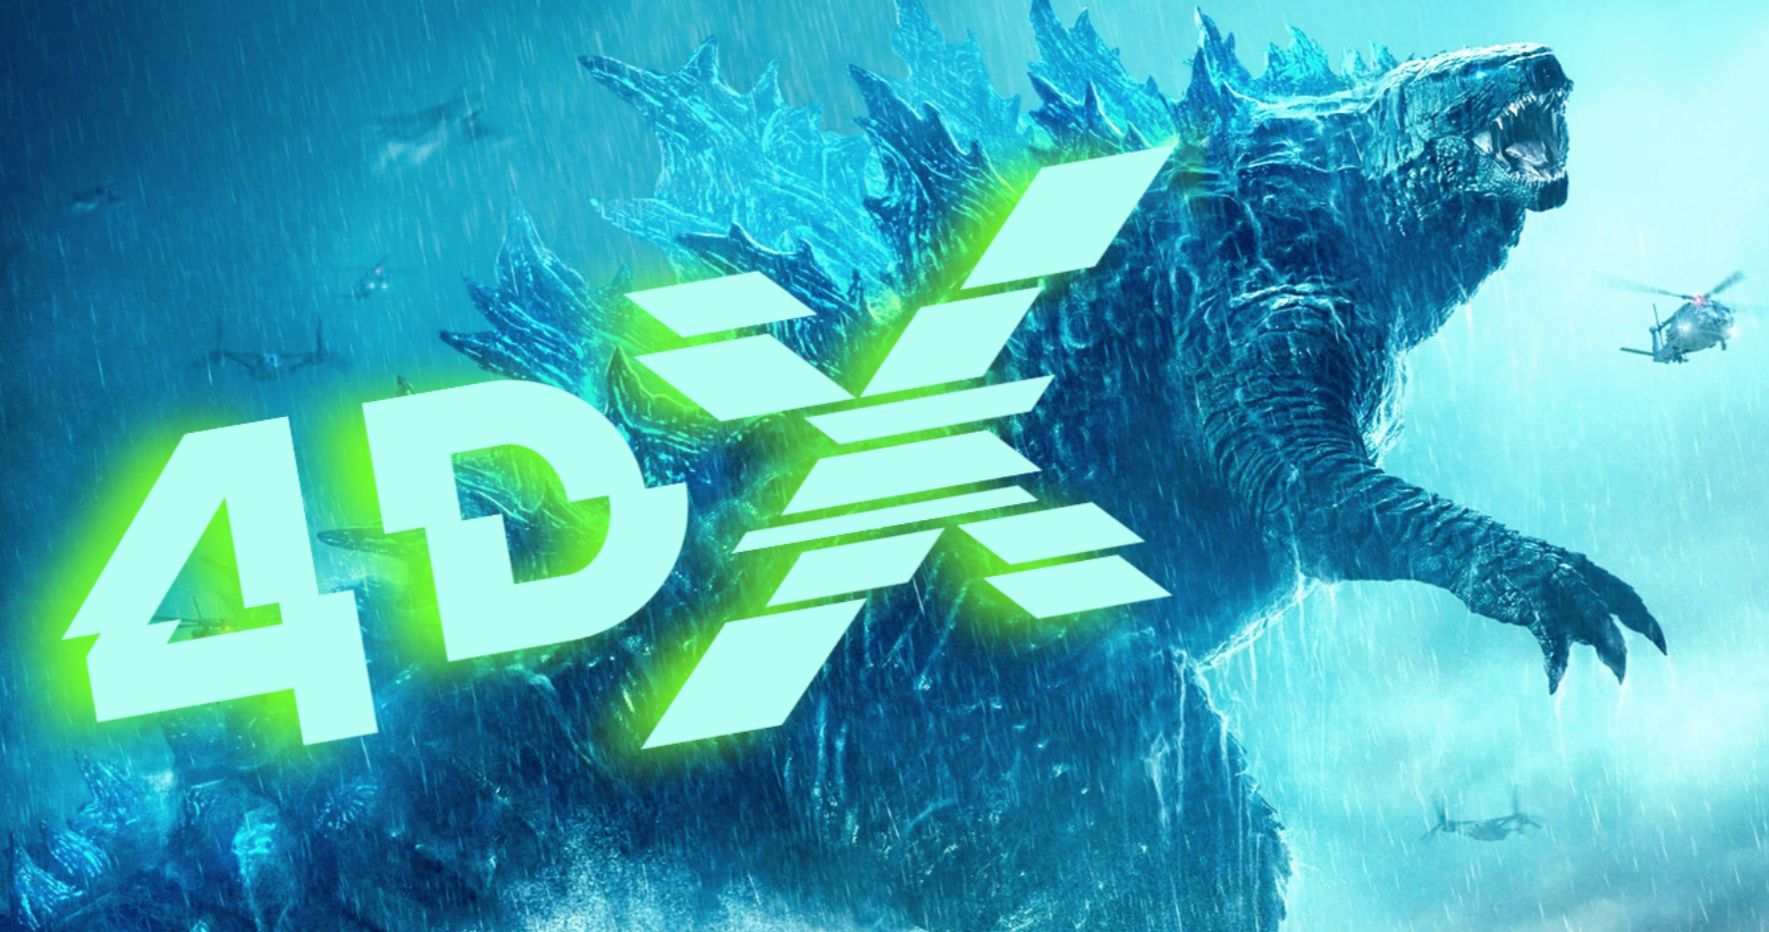 Godzilla: King of The Monsters 4DX Review: The Perfect Summer Movie Experience